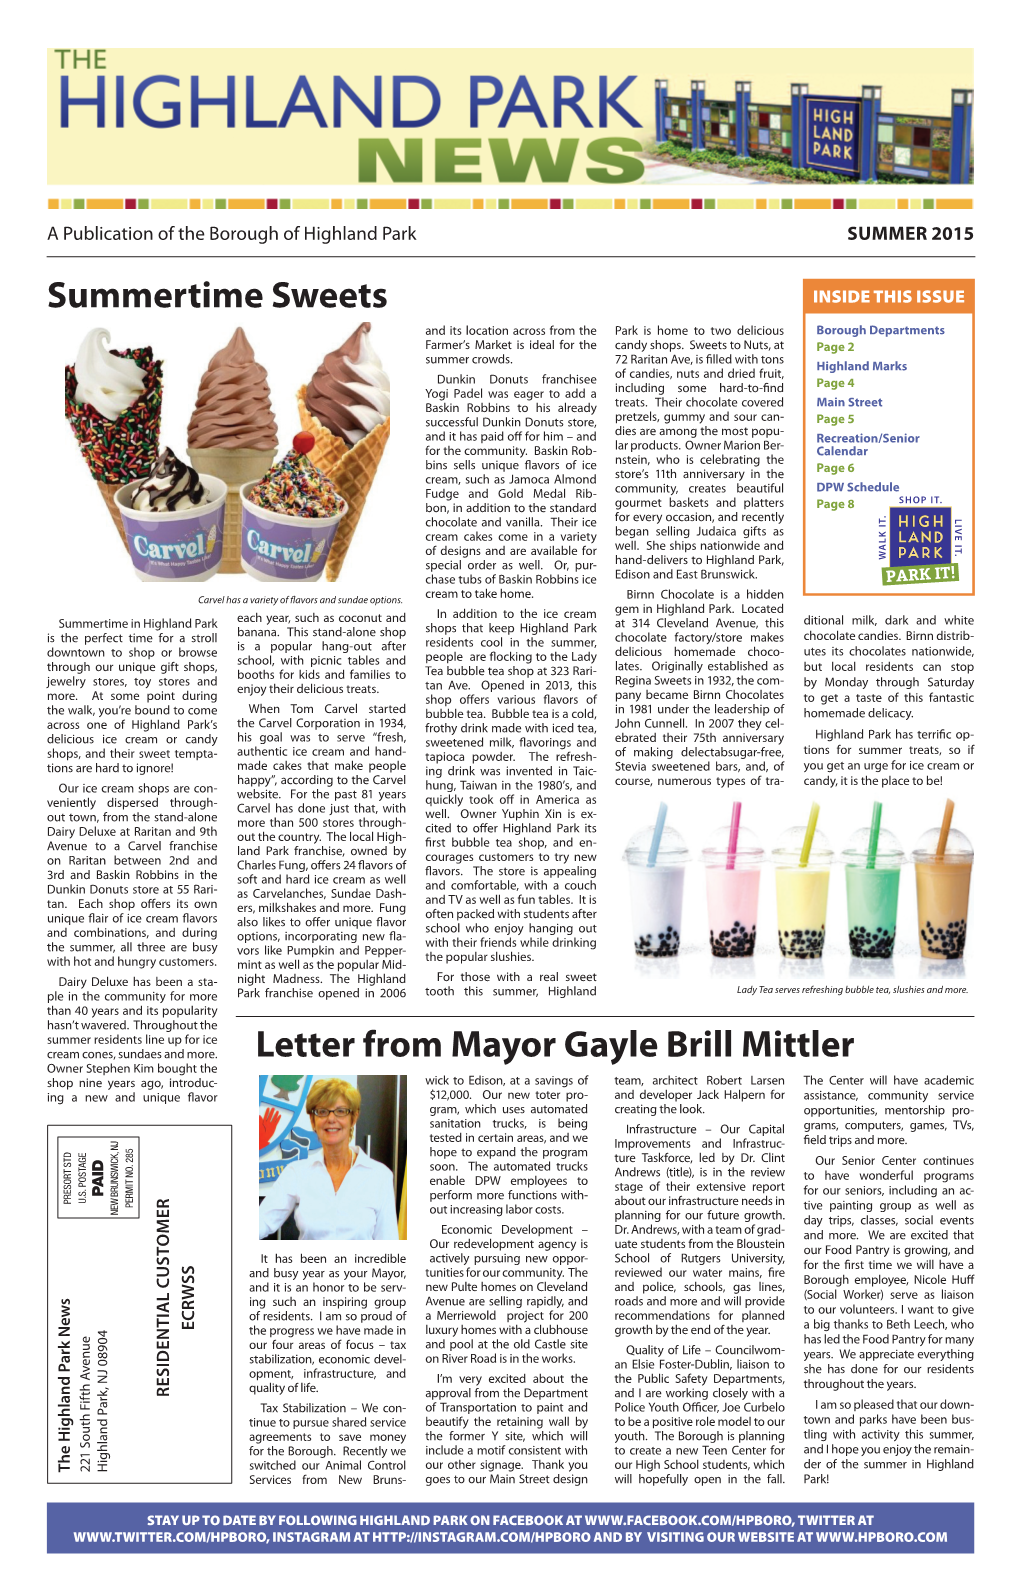 Summertime Sweets Letter from Mayor Gayle Brill Mittler